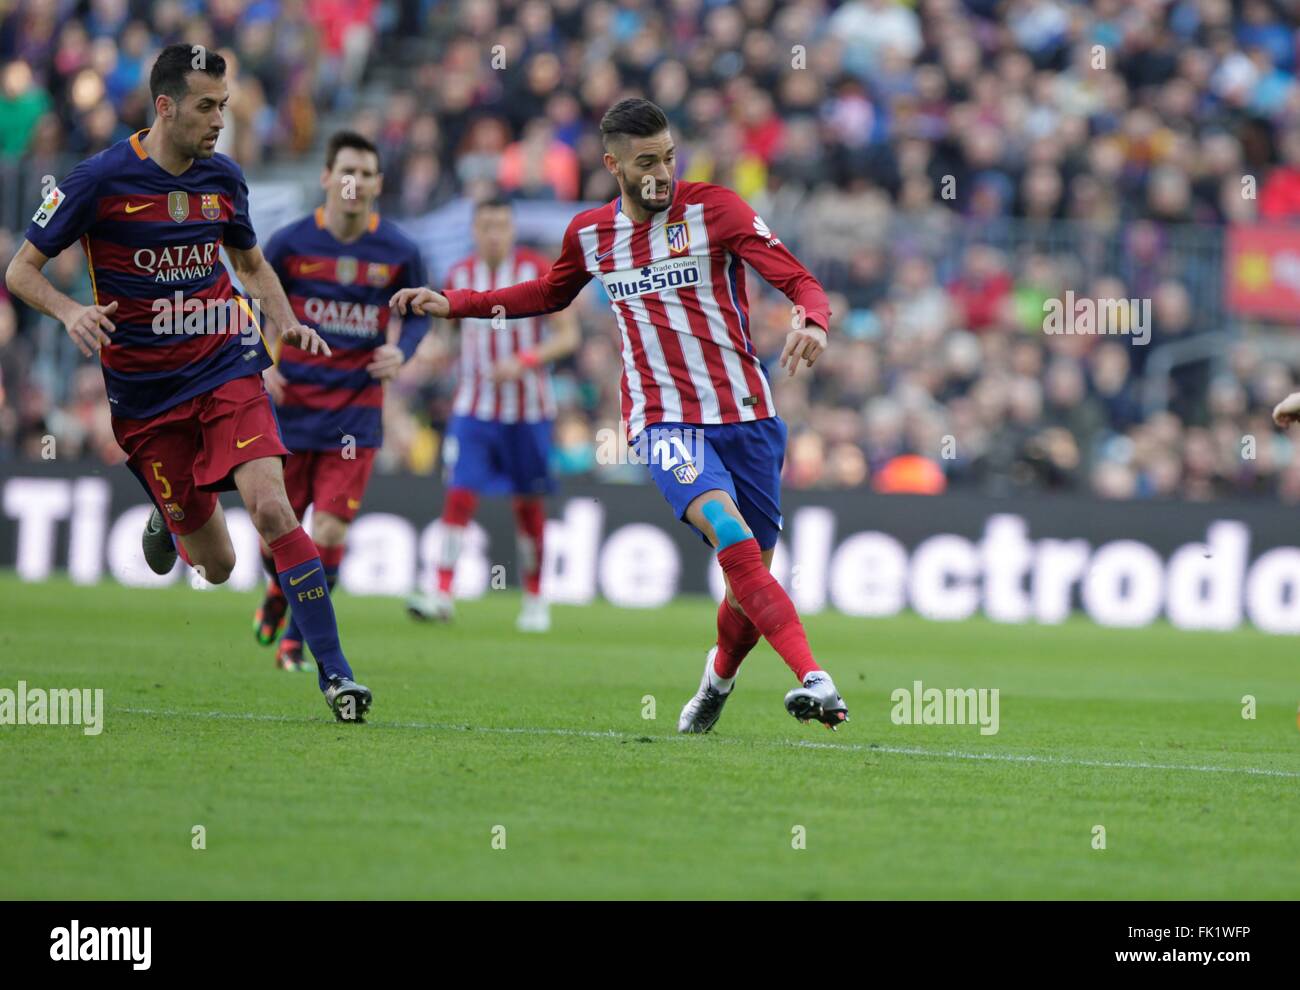 Yannick Carrasco in action during the La Liga match FC Barcelona - Atlético Madrid January 30, 2016 at the Camp Nou, Barcelona, Stock Photo